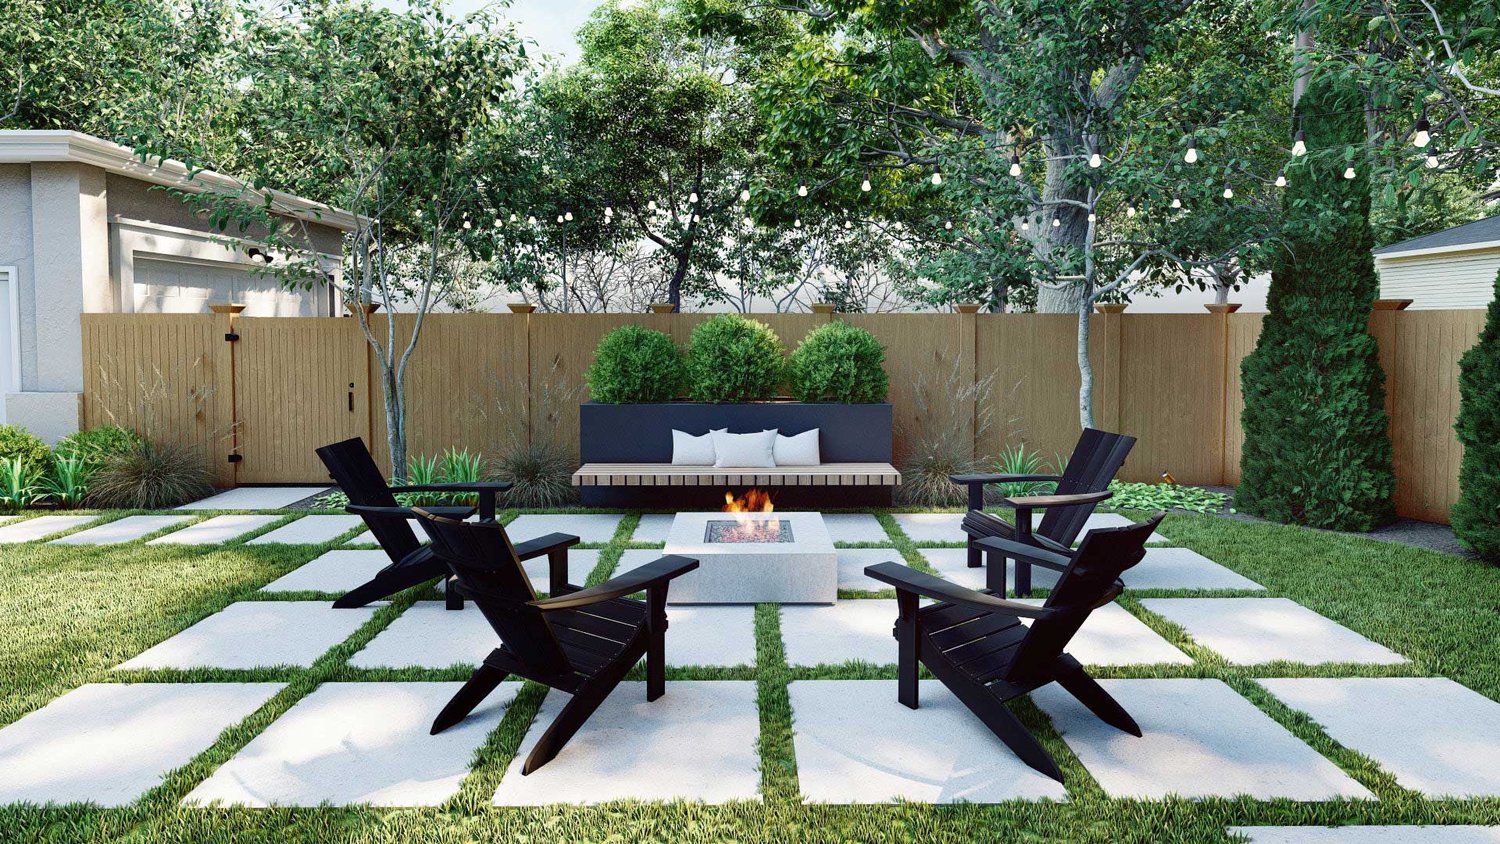 Milwaukee backyard fire pit seating area with path stones, grass, trees and shrubs